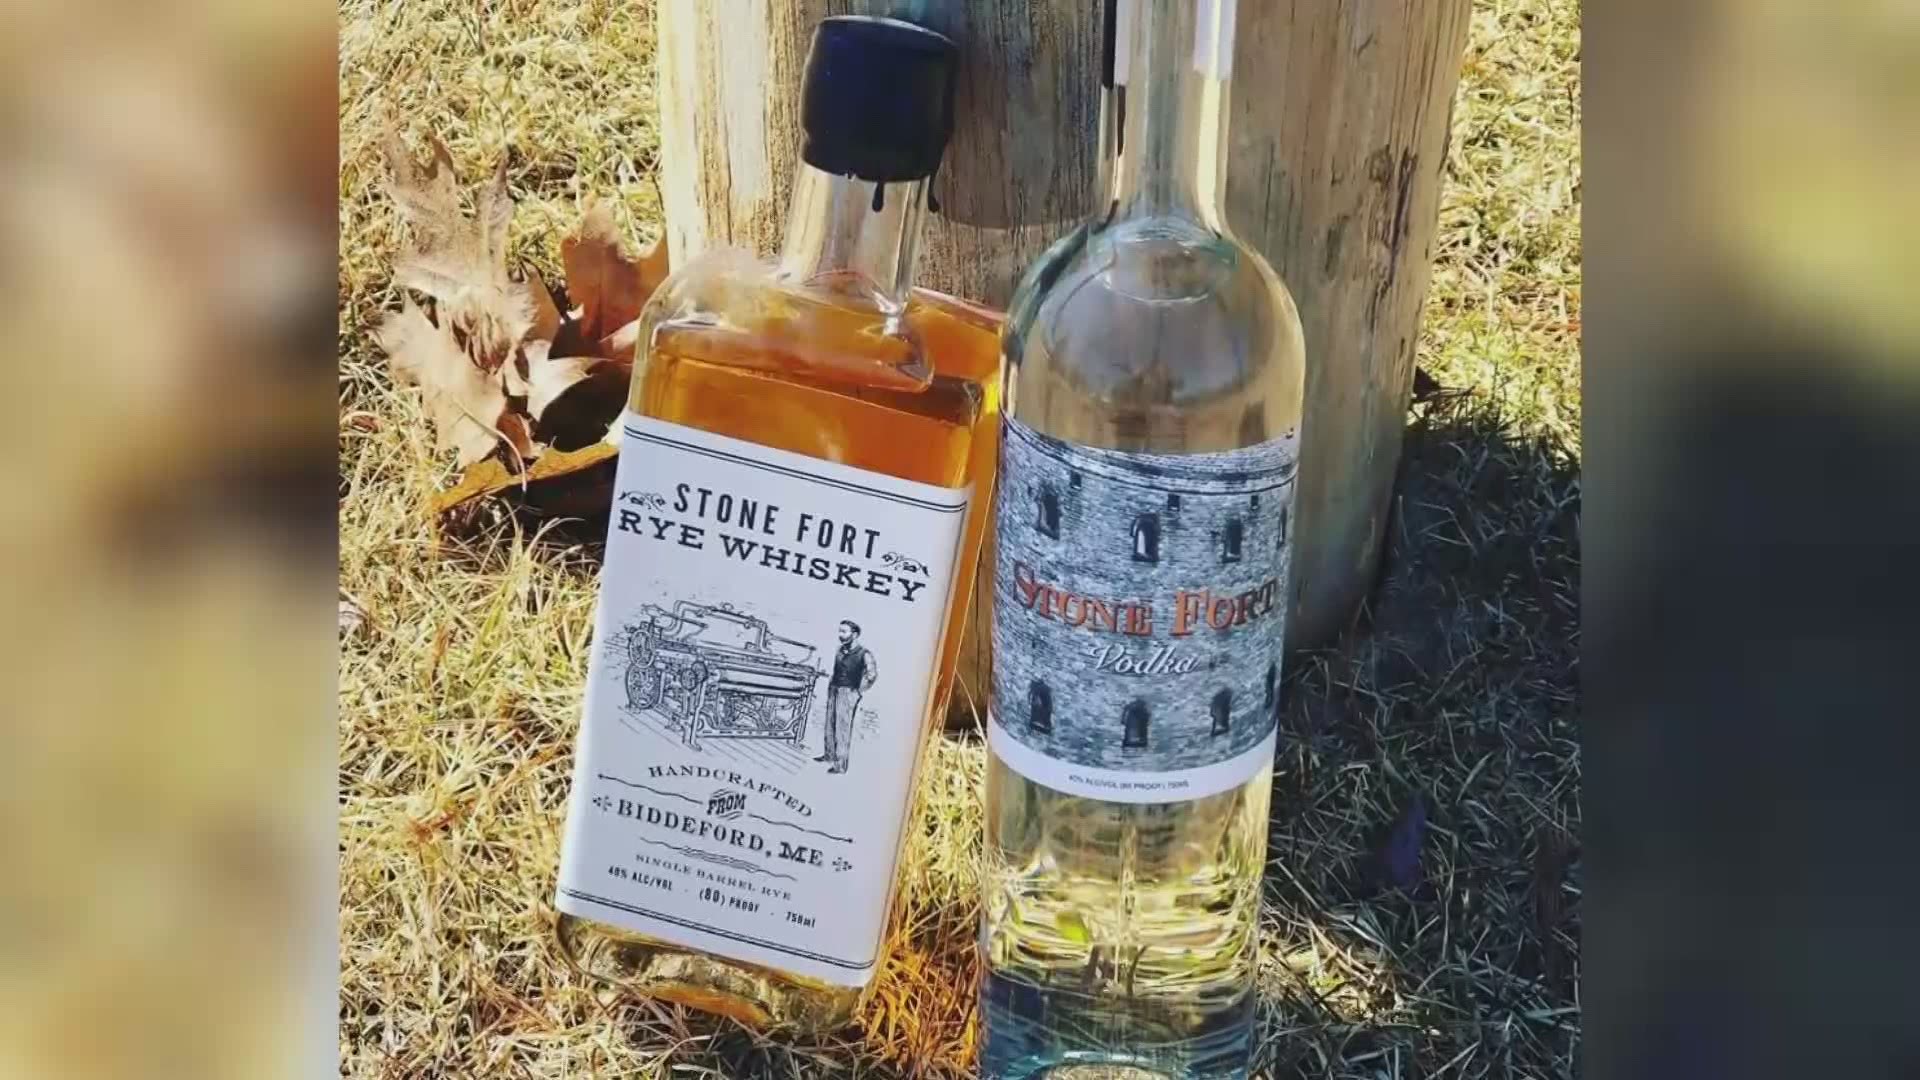 Stone Fort Distillery in Biddeford, Maine knew the right thing to do was to switch from whisky to hand sanitizer through the coronavirus, COVID-19 crisis.